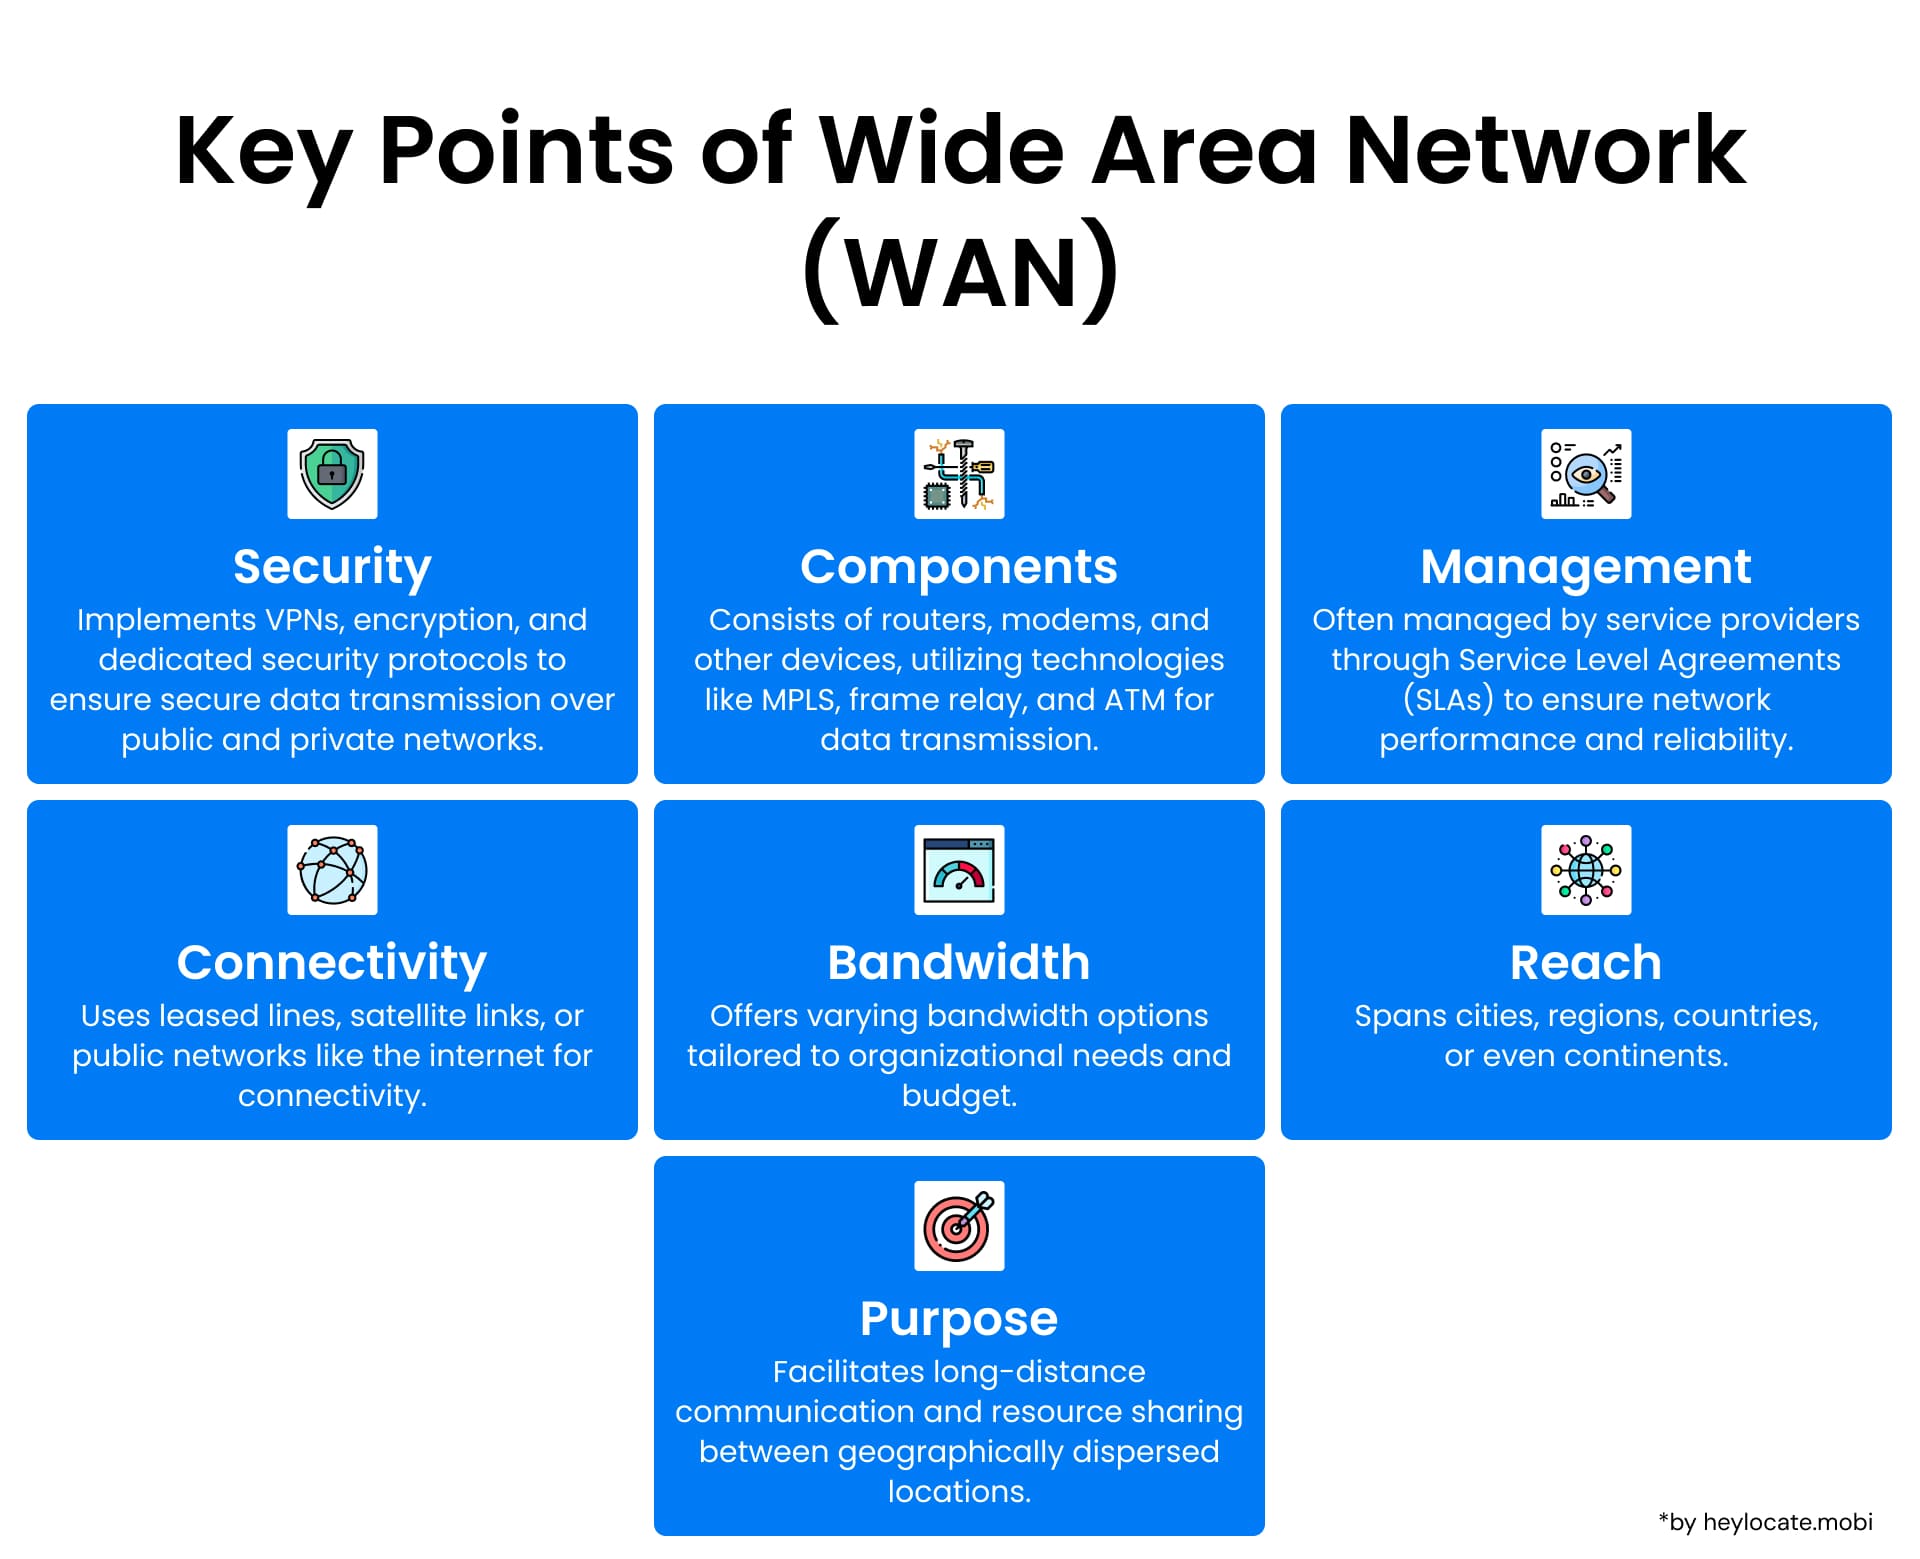 An infographic highlighting the key aspects of Wide Area Network (WAN) including security, components, management, connectivity, bandwidth, reach, and purpose